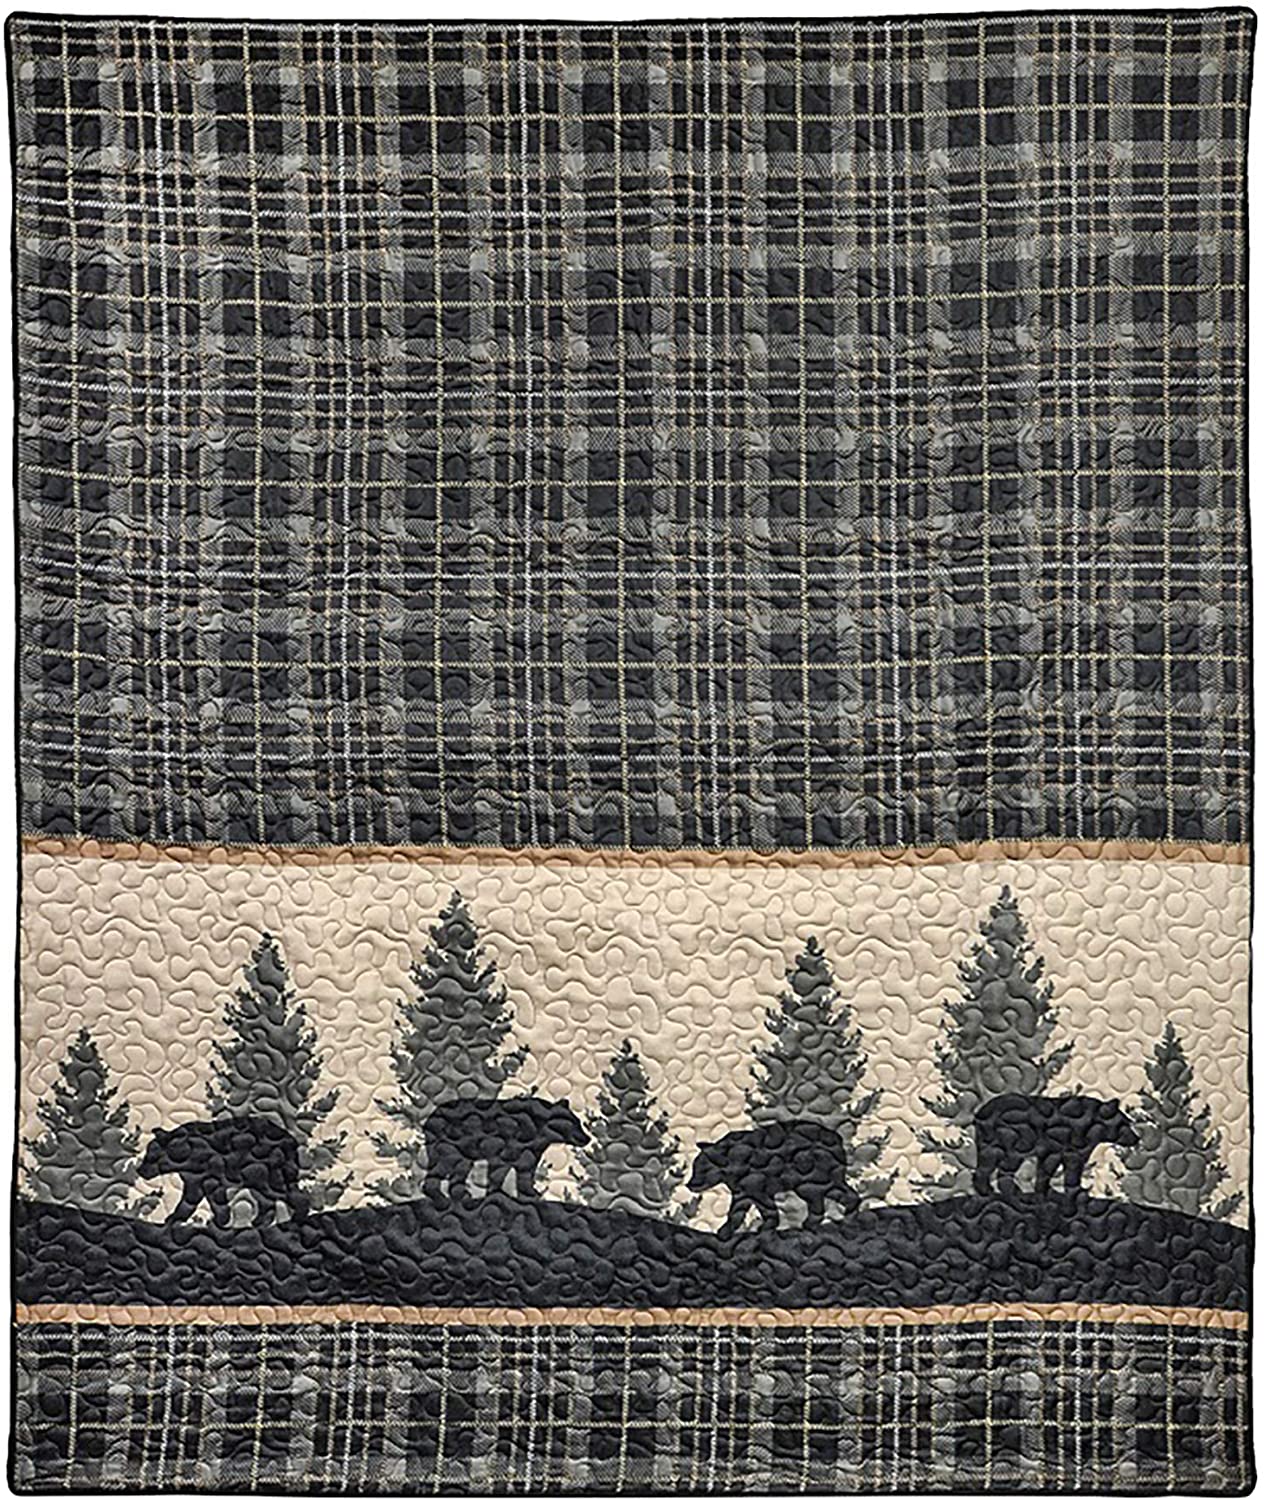 Details about   Donna Sharp California King Quilt Bear Walk Plaid Lodge Quilt with Bear Patter 